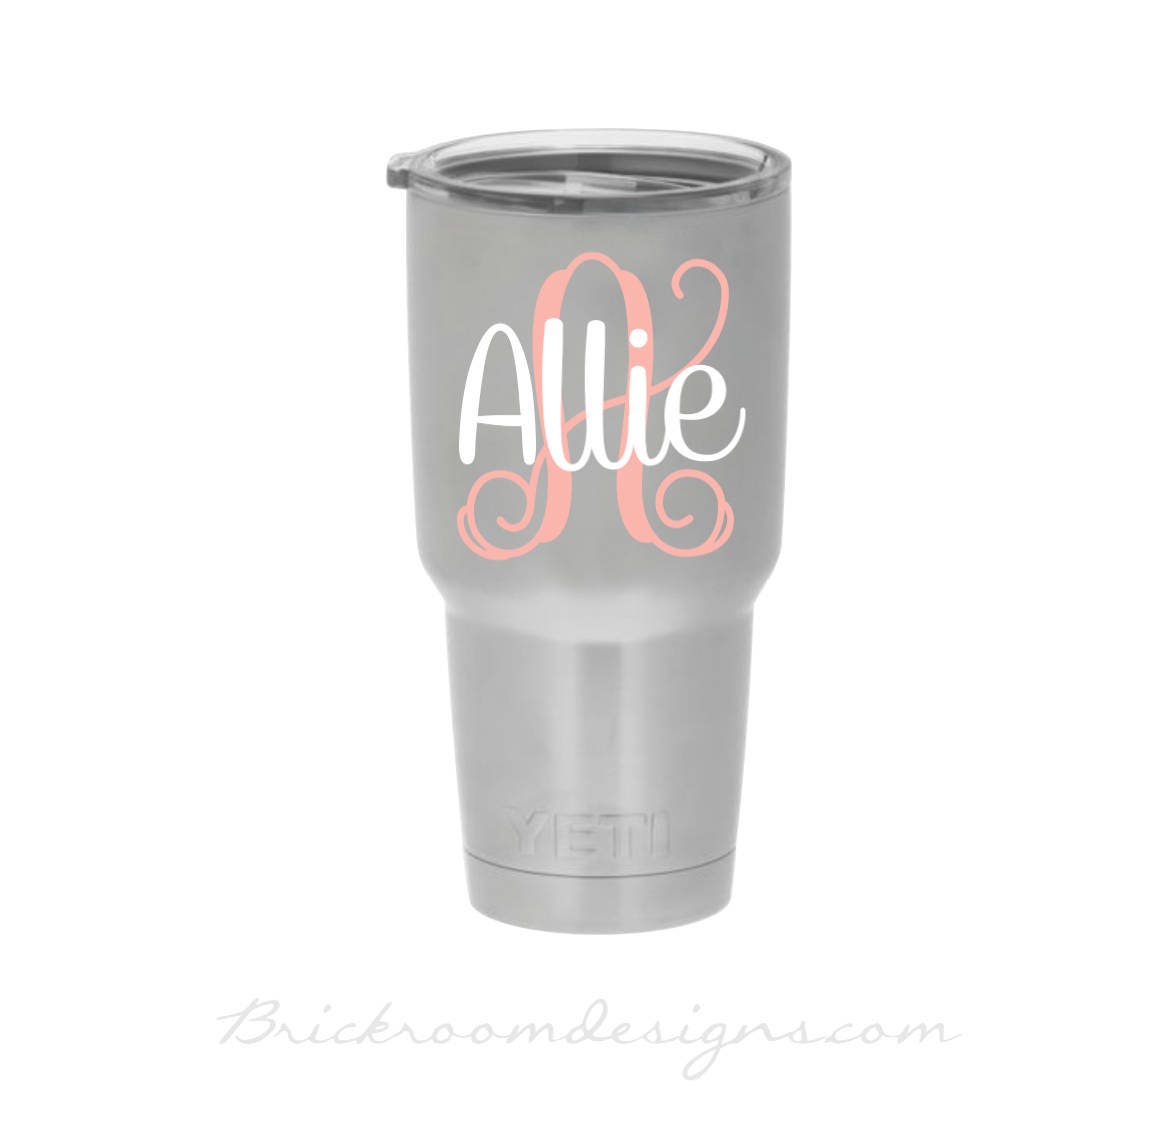 Vinyl Sticker, Name decal, Monogram, personalized vinyl decal, monogram  sticker, laptop skin, cup, yeti tumbler, mug sticker, car decal, ·  VineandWhimsyDesigns · Online Store Powered by Storenvy